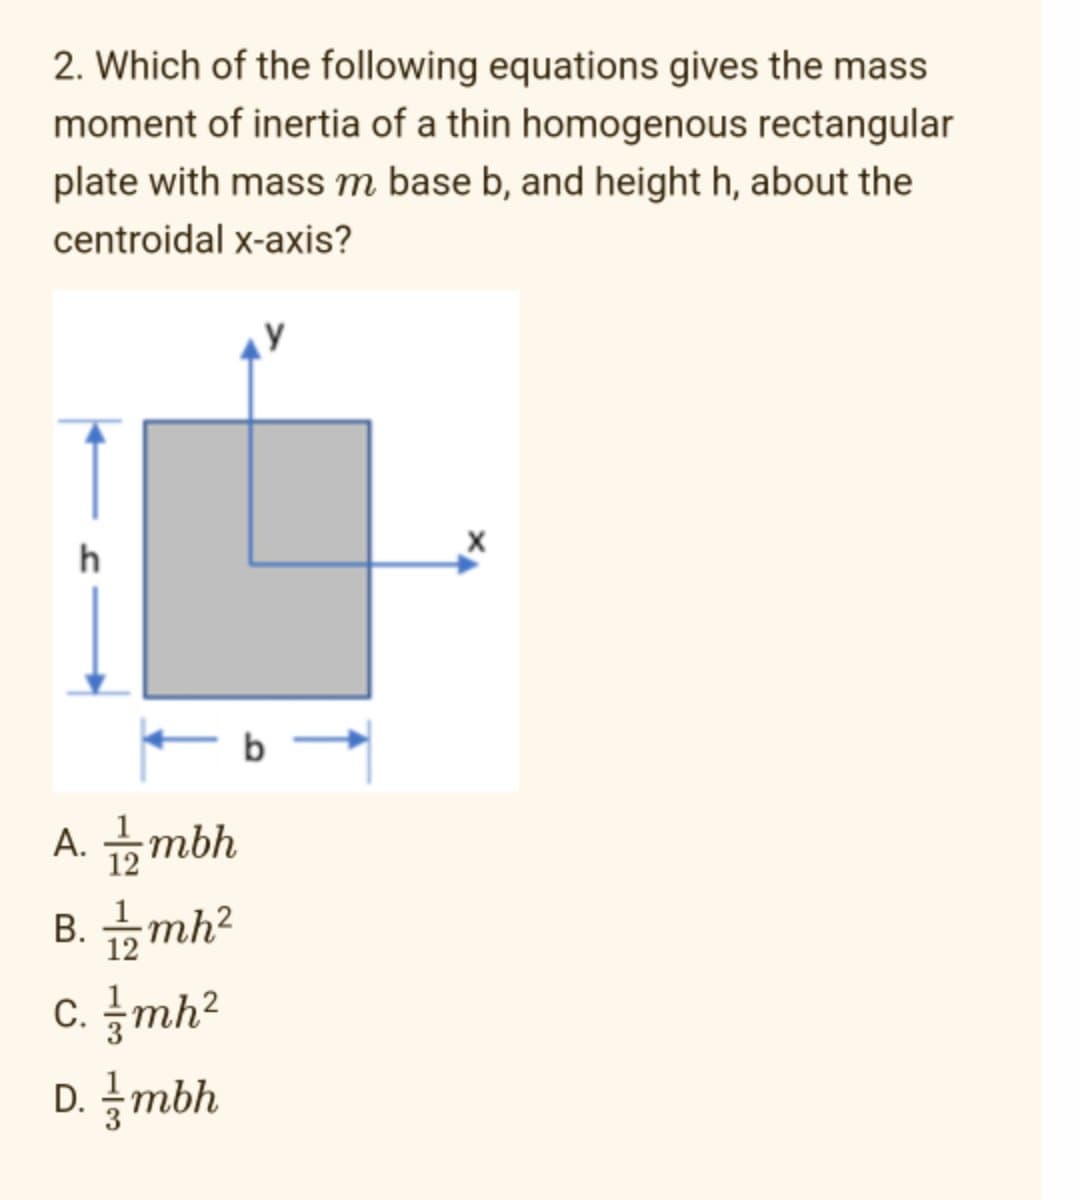 2. Which of the following equations gives the mass
moment of inertia of a thin homogenous rectangular
plate with mass m base b, and height h, about the
centroidal x-axis?
h
- b -
A. 1/2mbh
B. 1/2mh²
c. mh²
D. /mbh
X